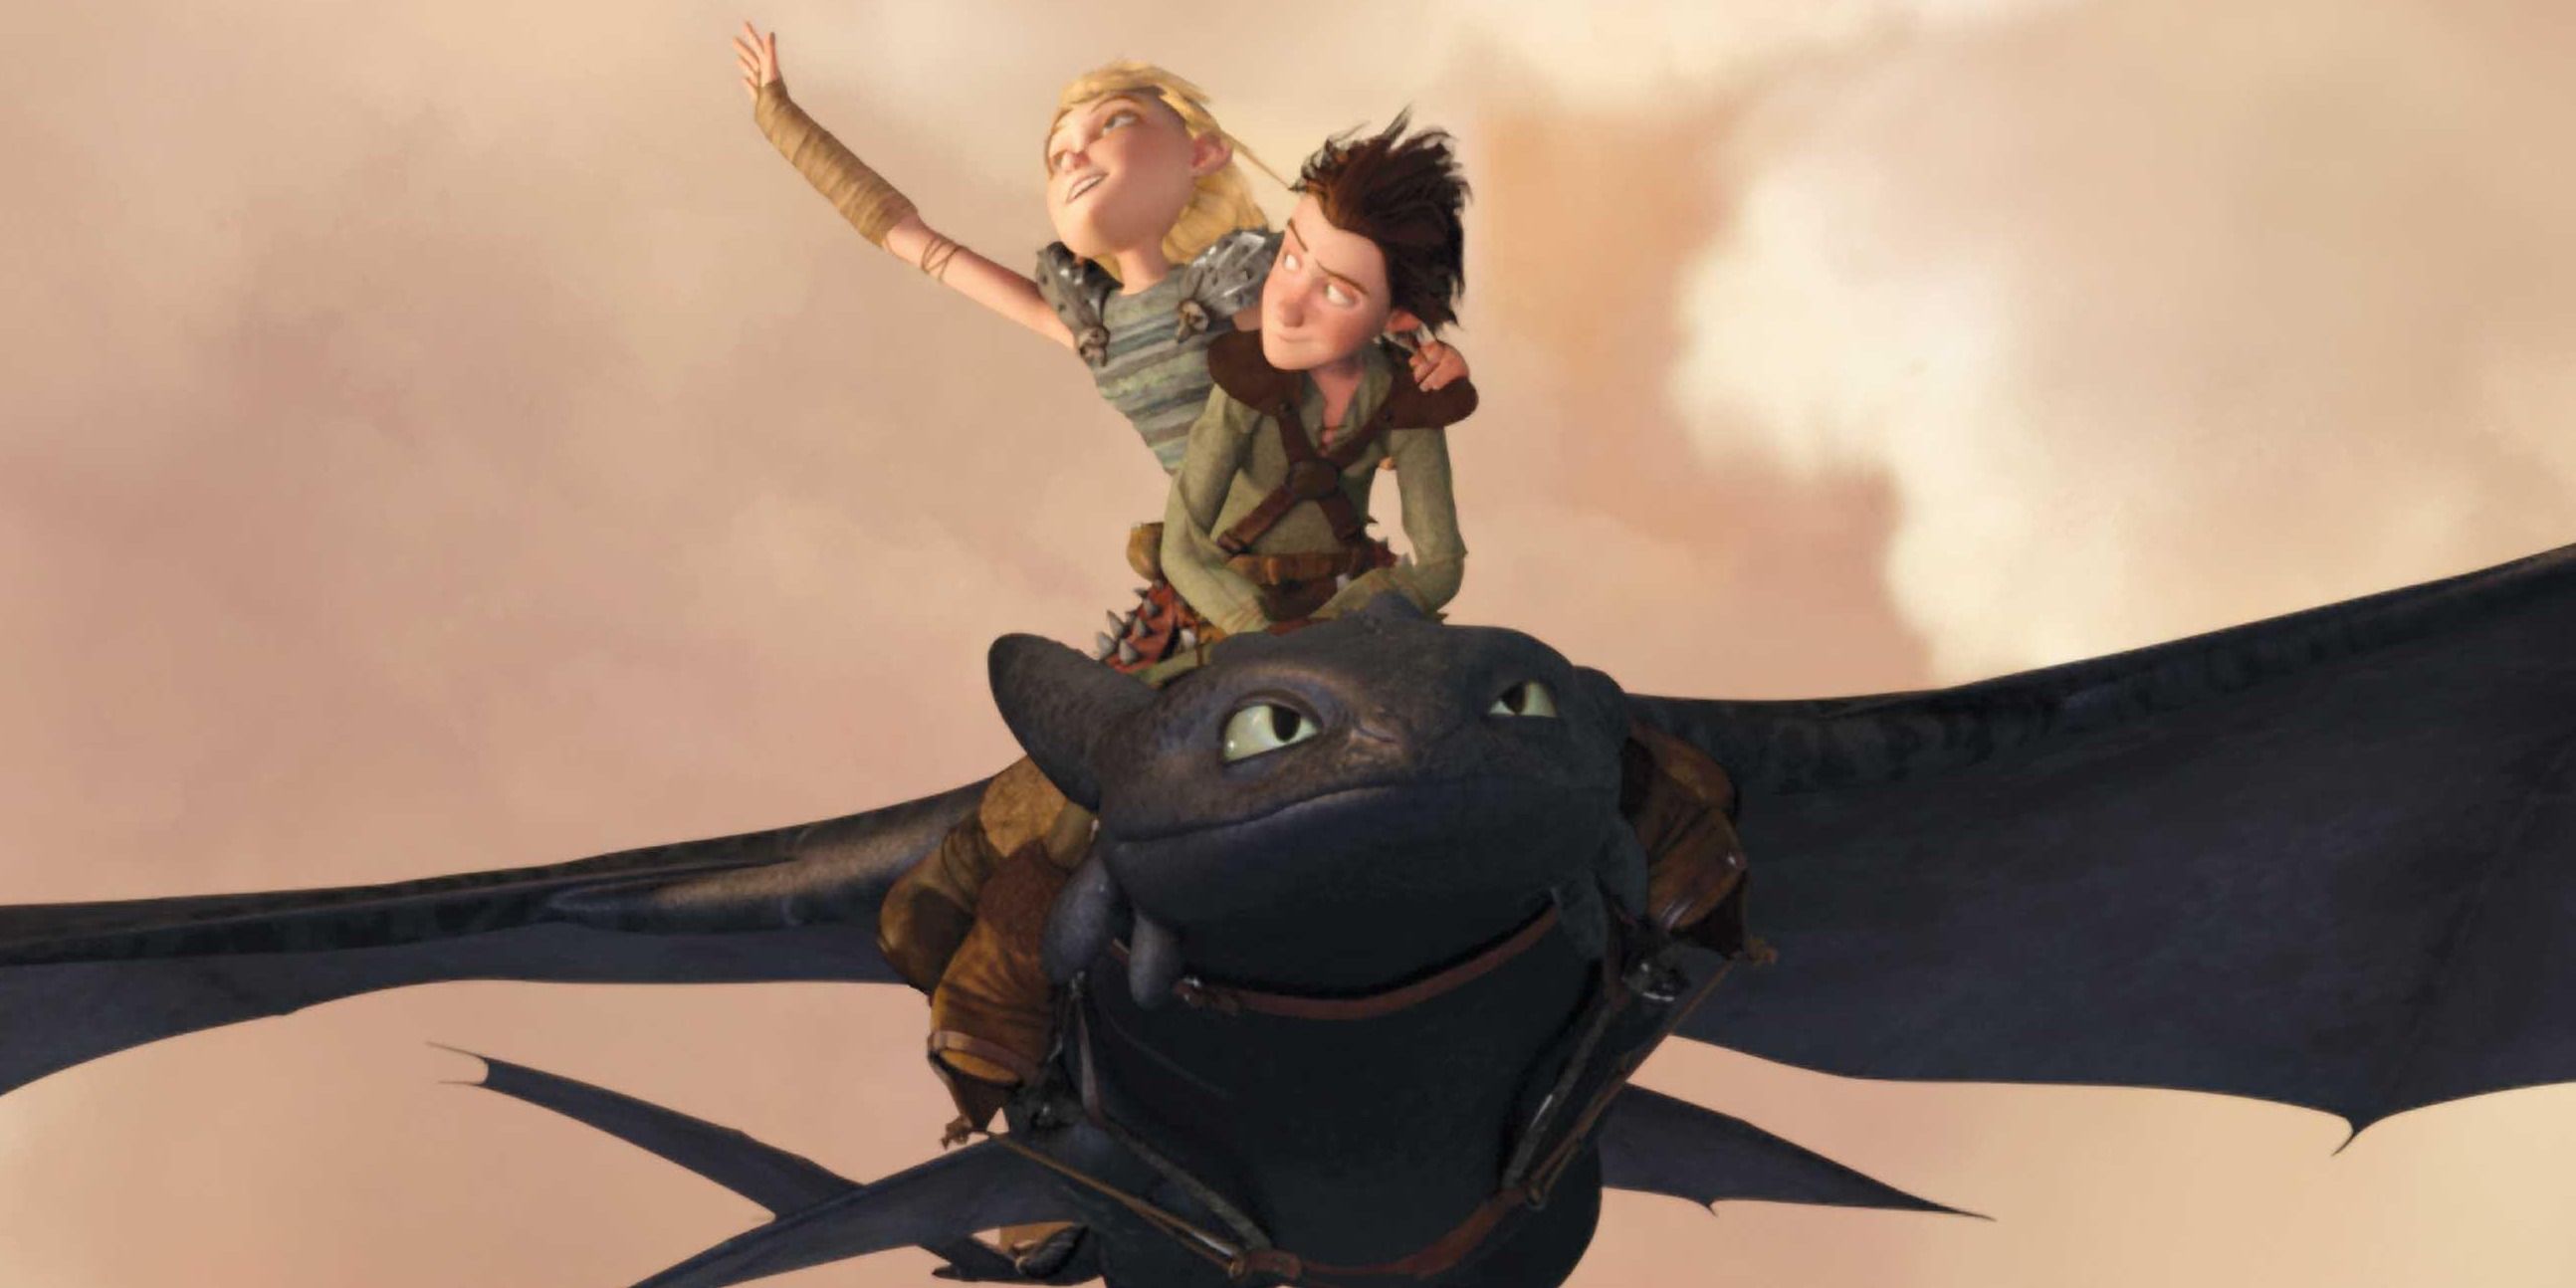 Astrid, Hiccup, and Toothless in How to Train Your Dragon.